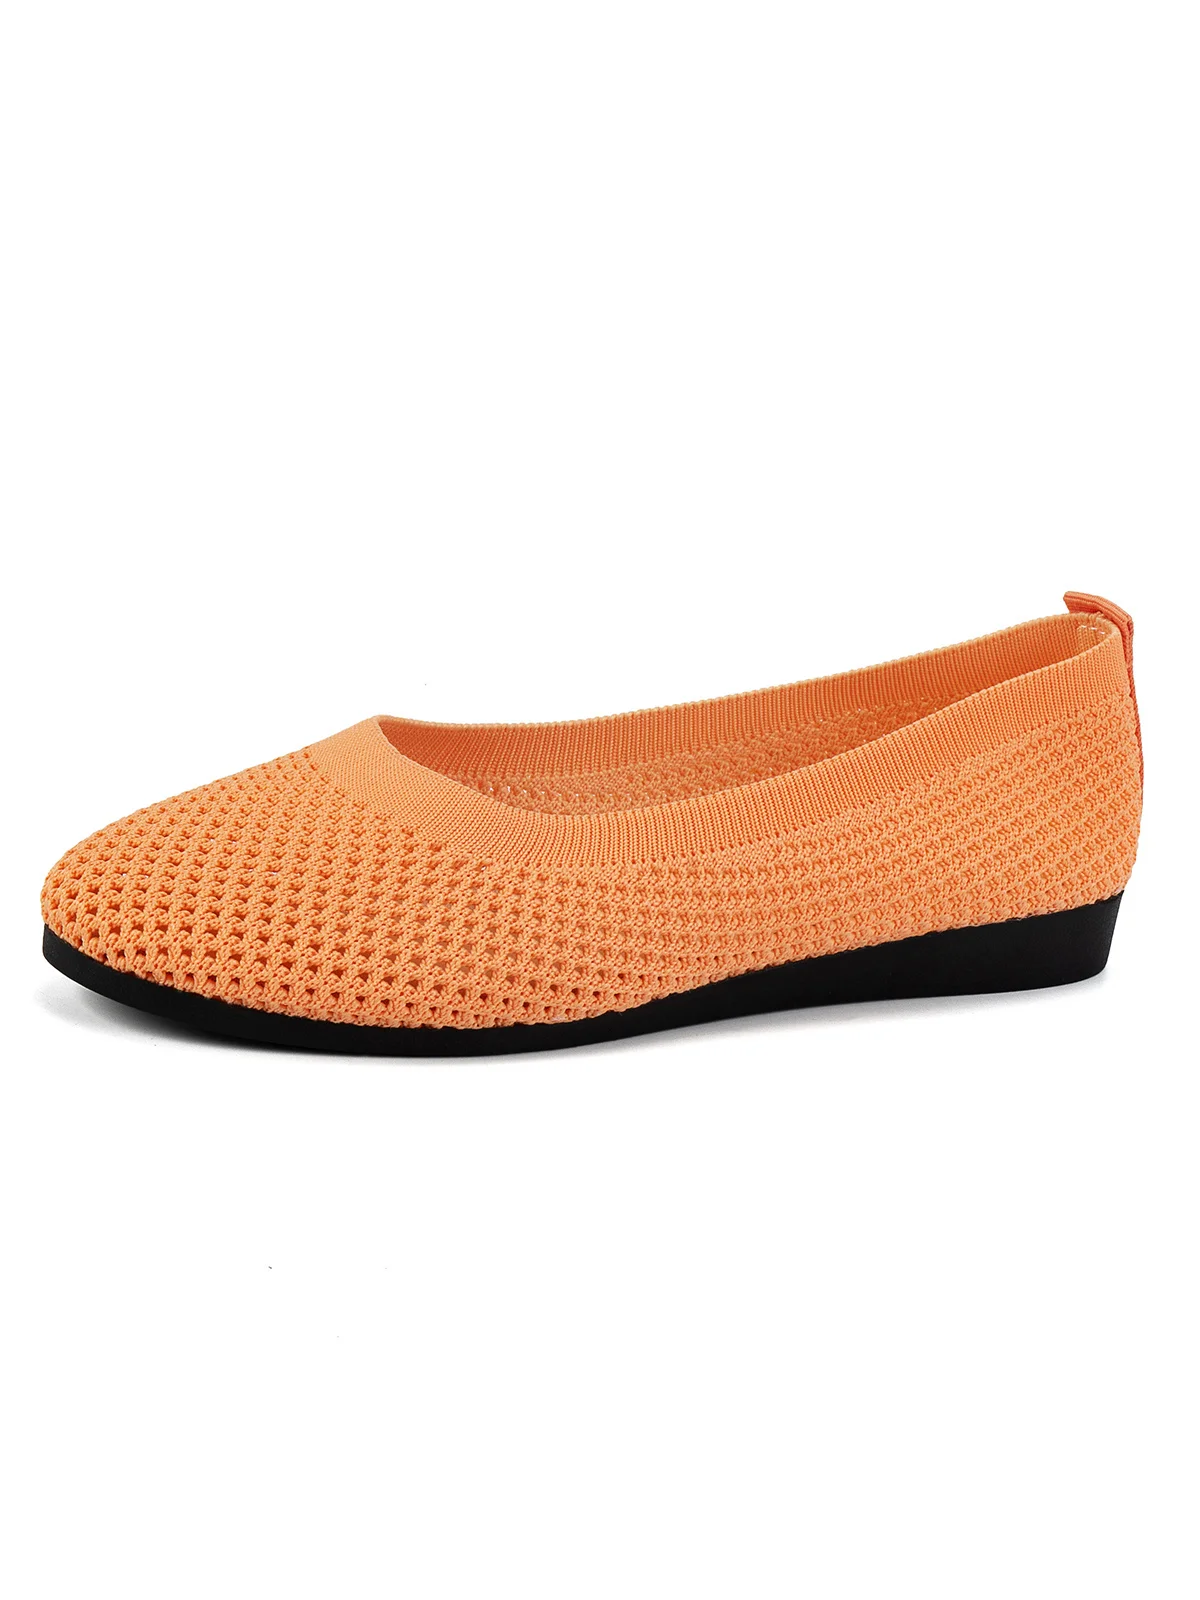 Women's Solid Color Flat Shoes Breathable Hollow out Lightweight Mesh Fabric Casual Shallow Shoes